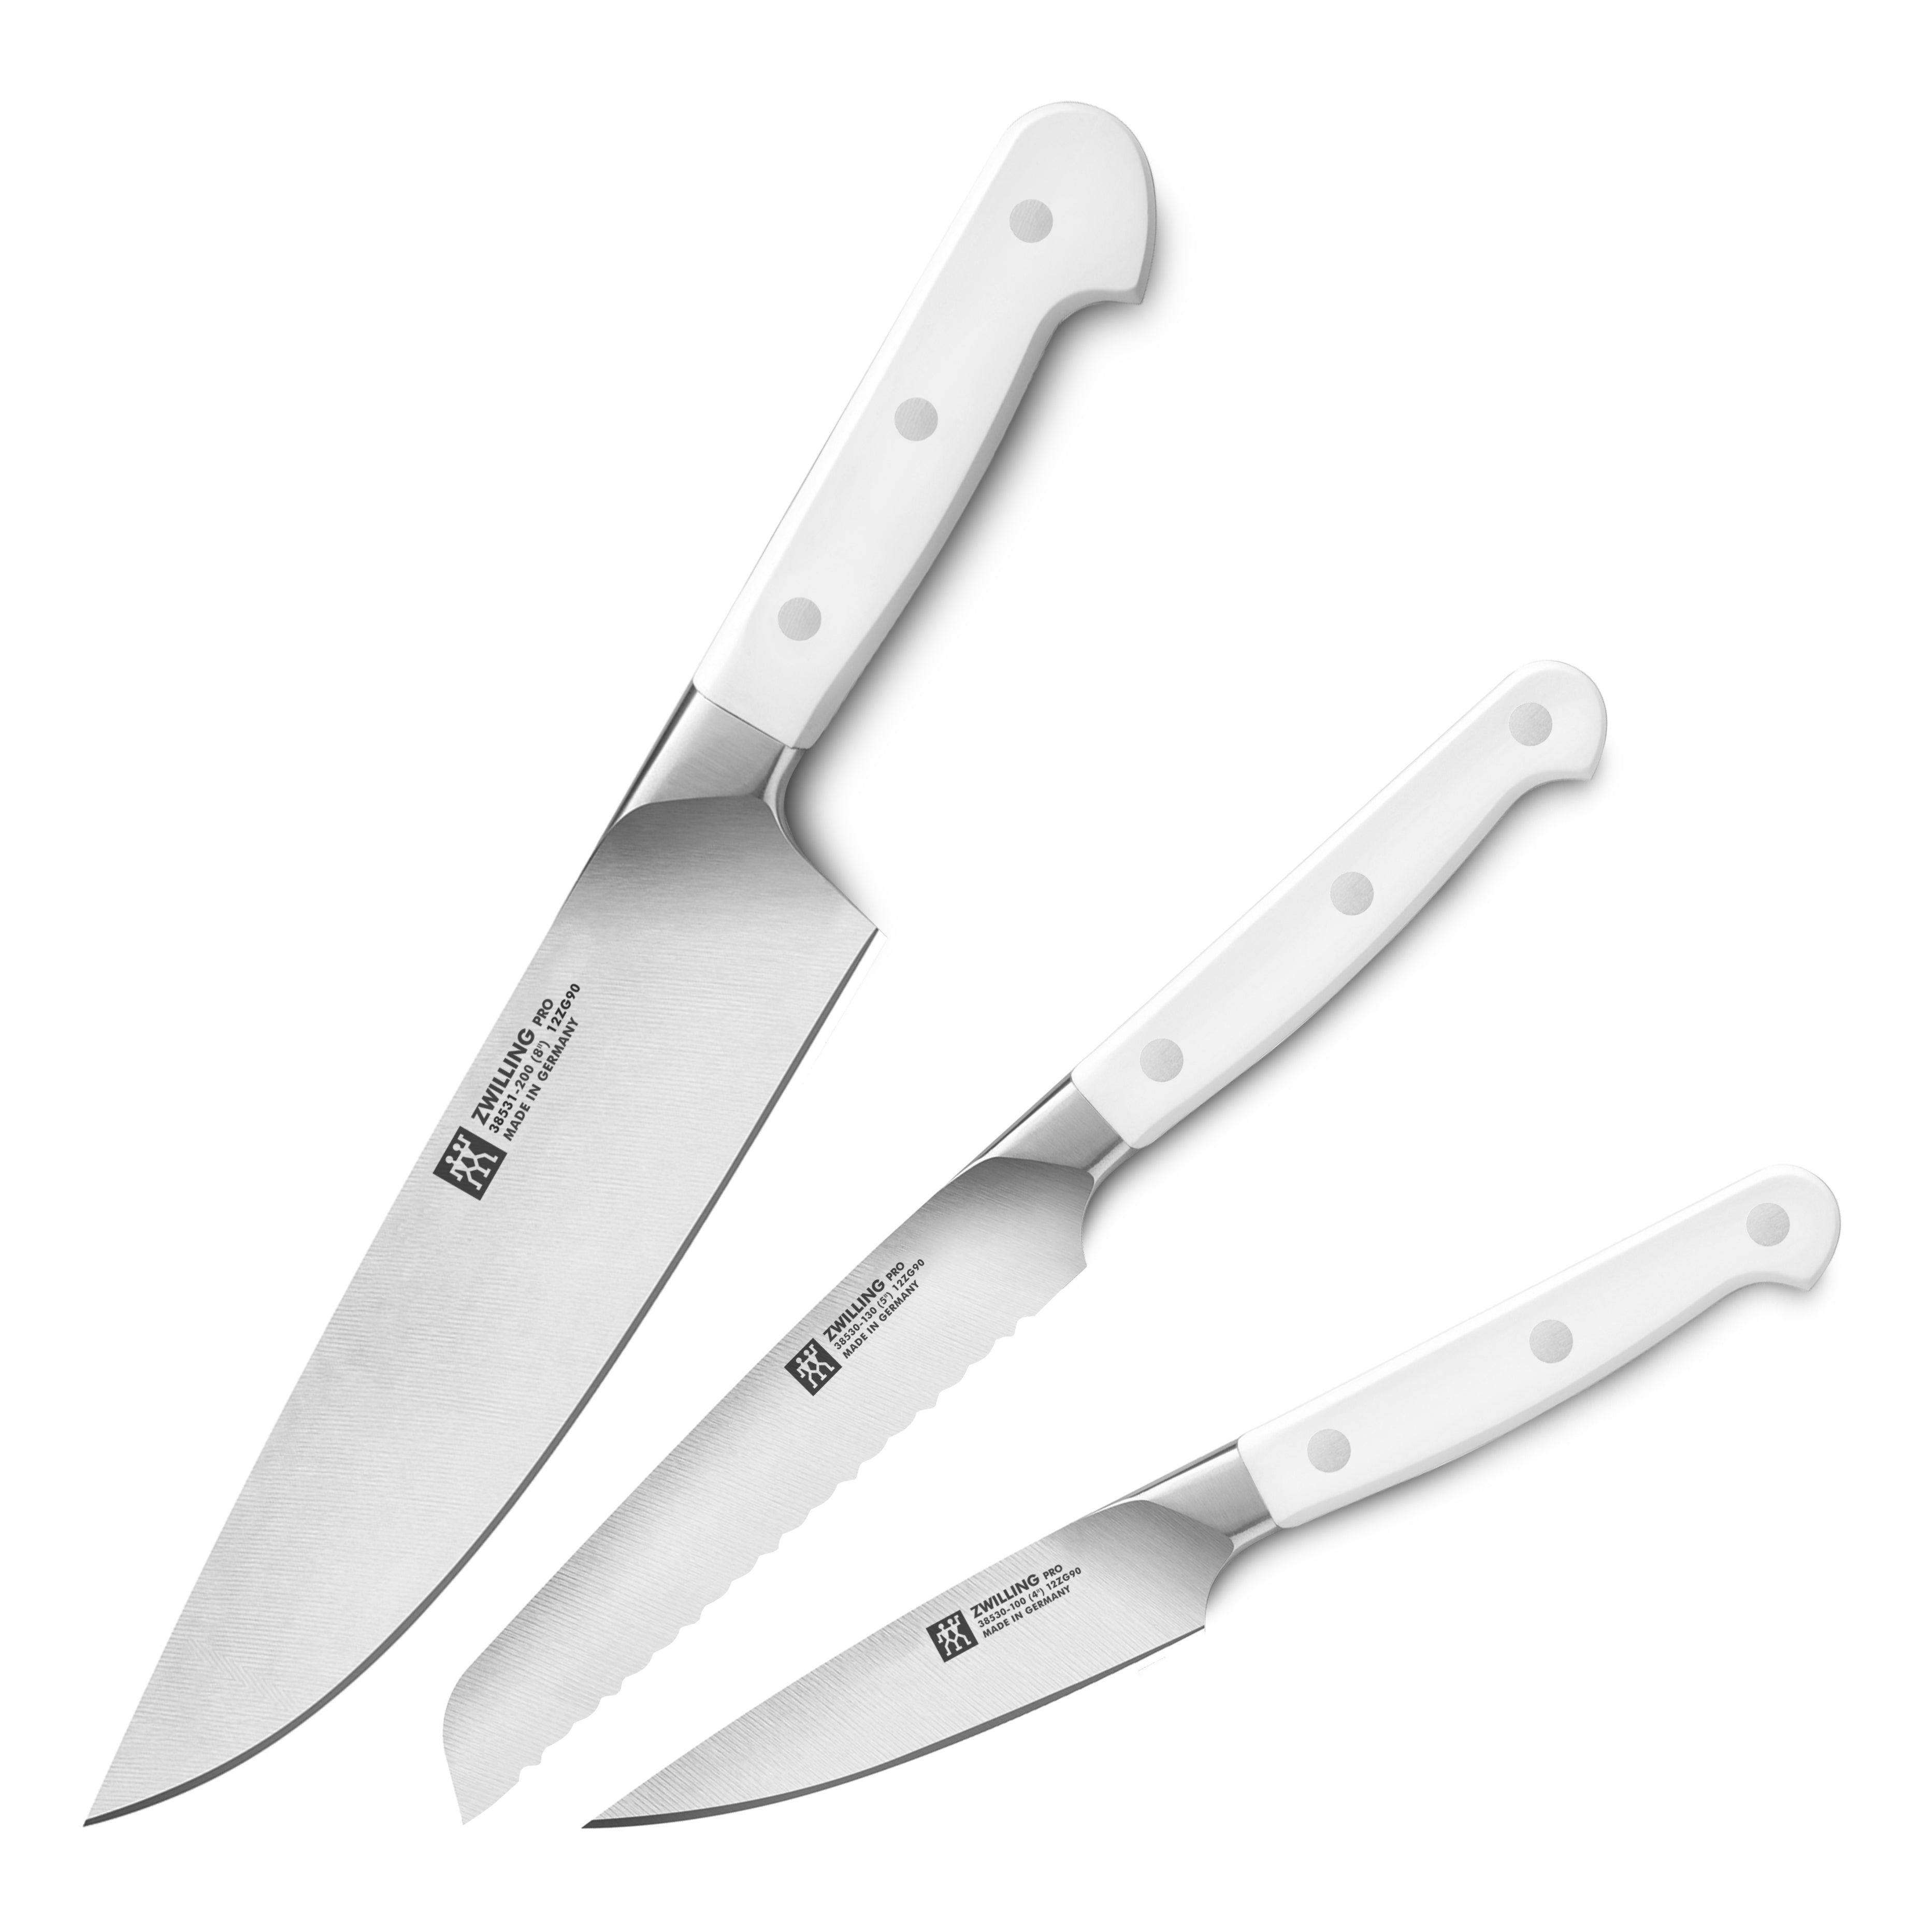 A 15-Piece Set of J.A. Henckels Knives Is Only $130 on